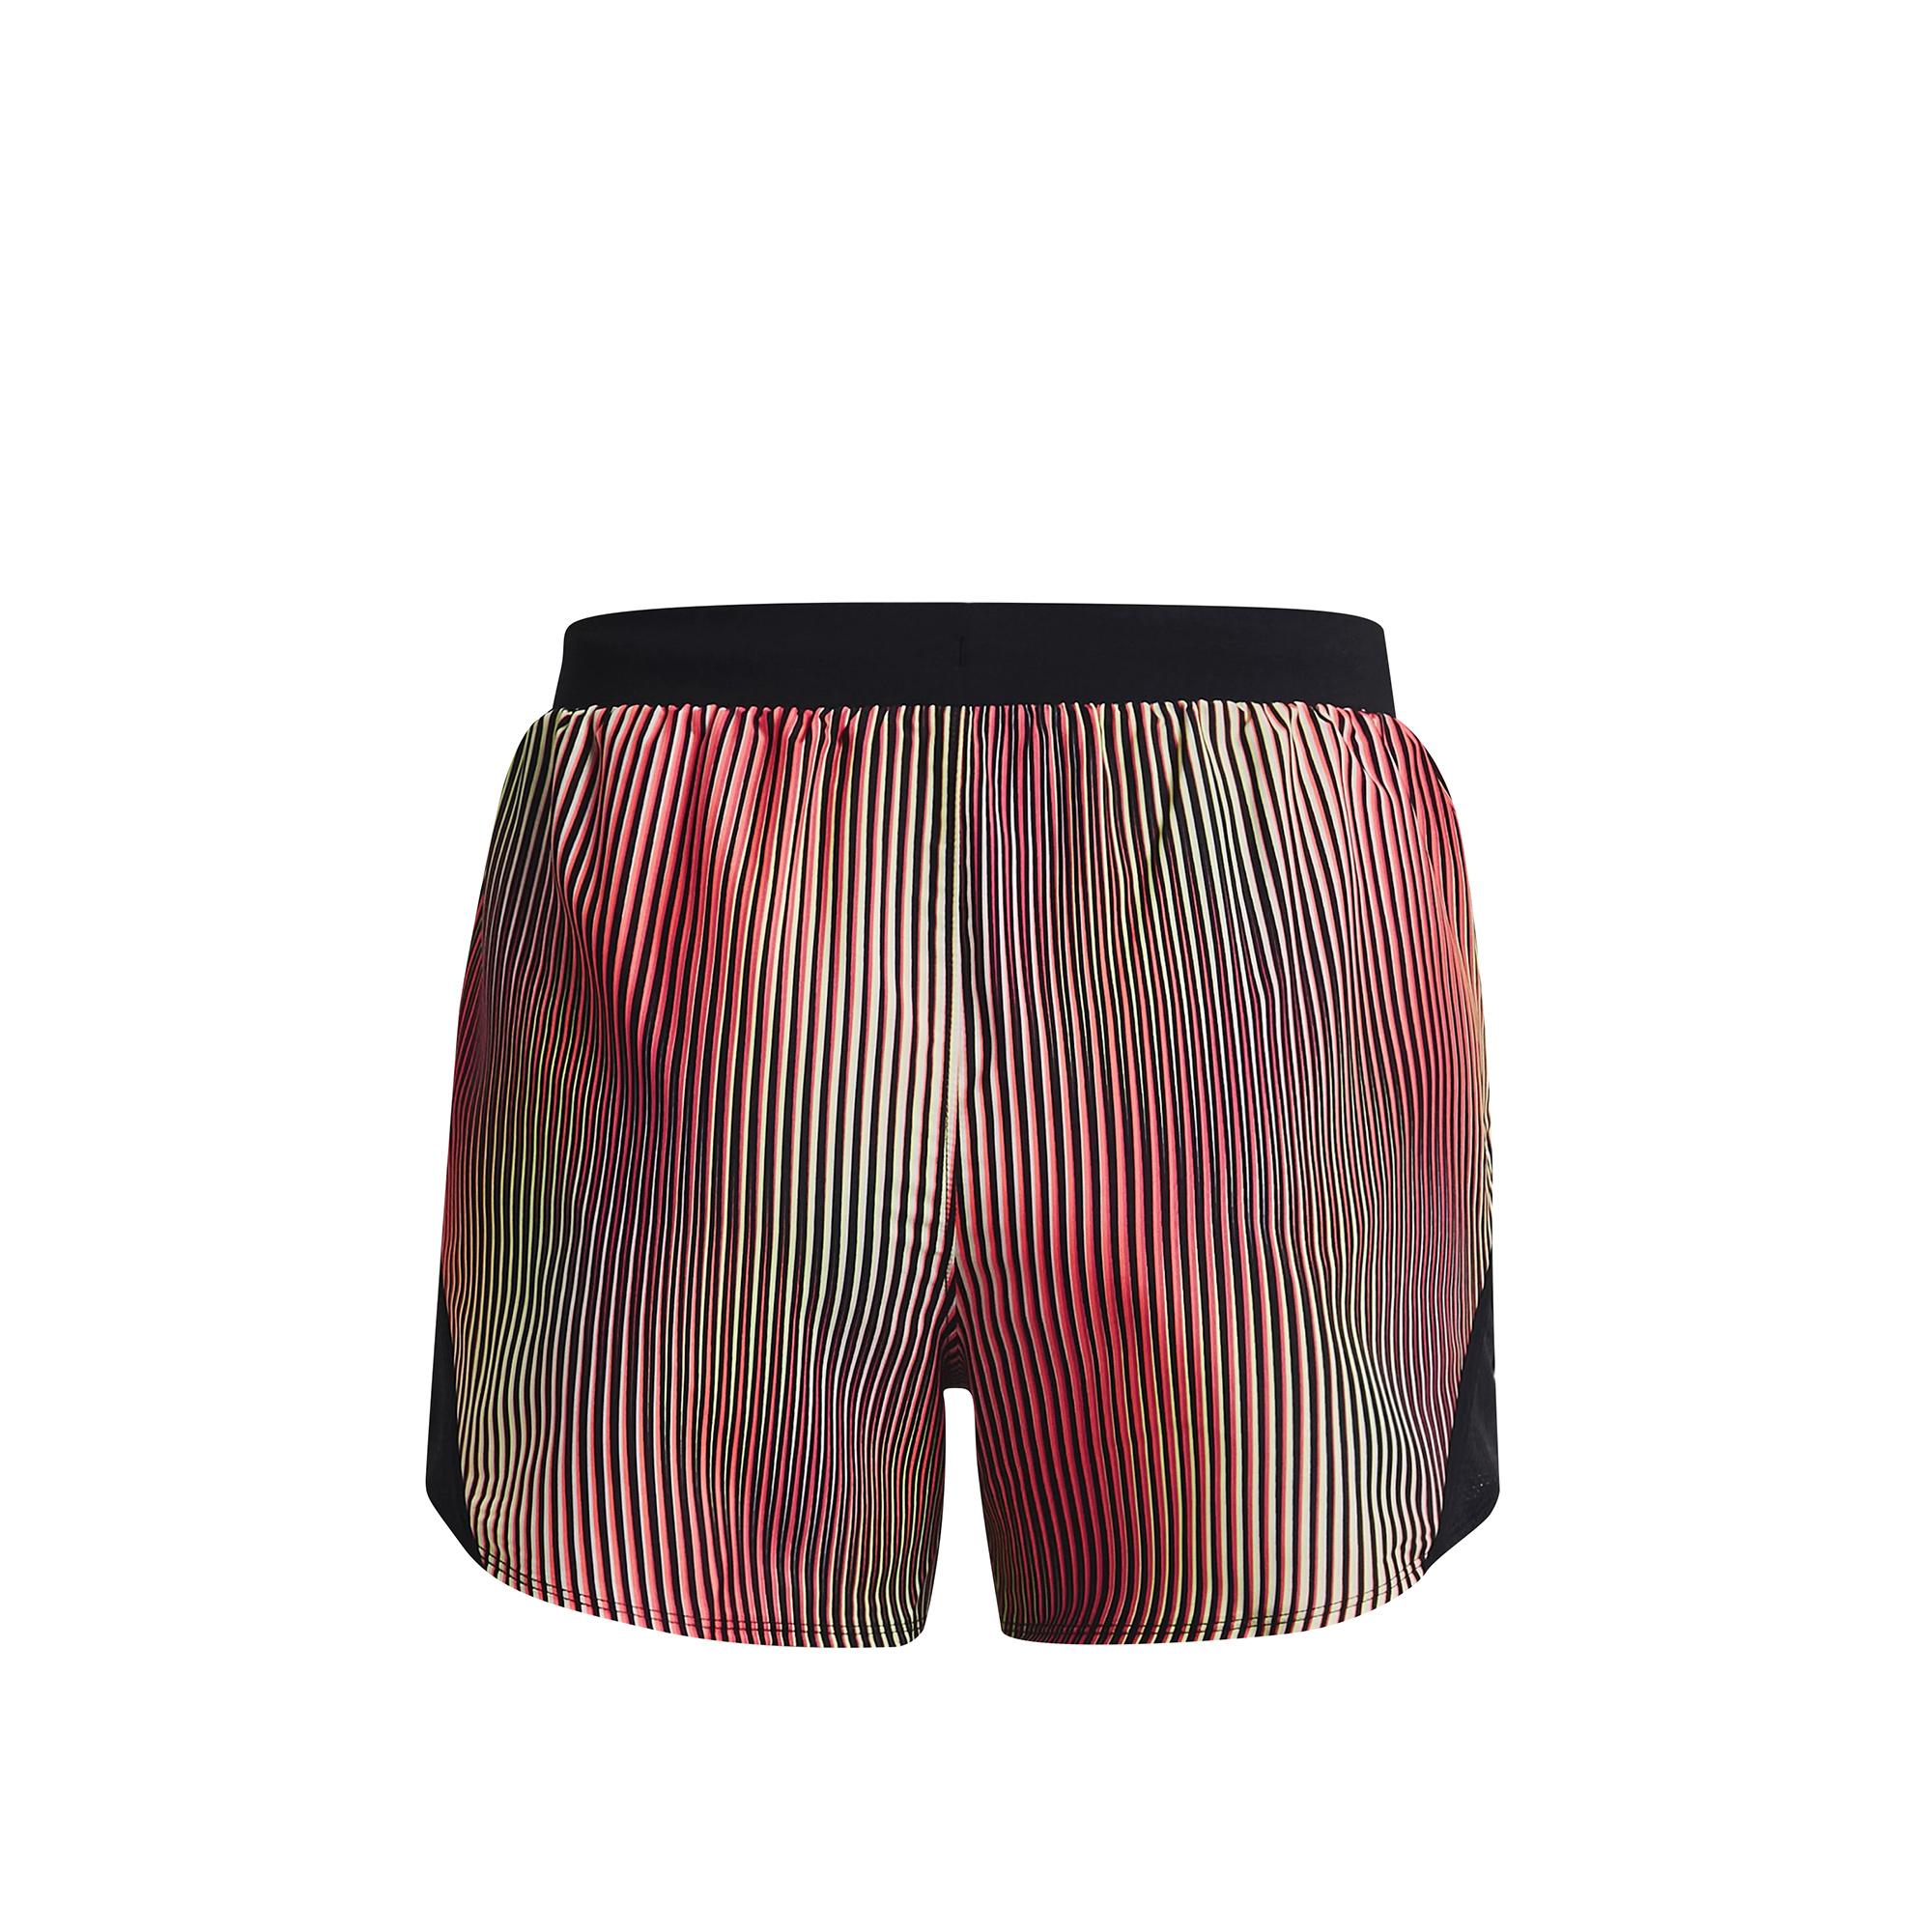 Quần ngắn thể thao nữ Under Armour Fly By 2.0 Chroma - 1365690-819